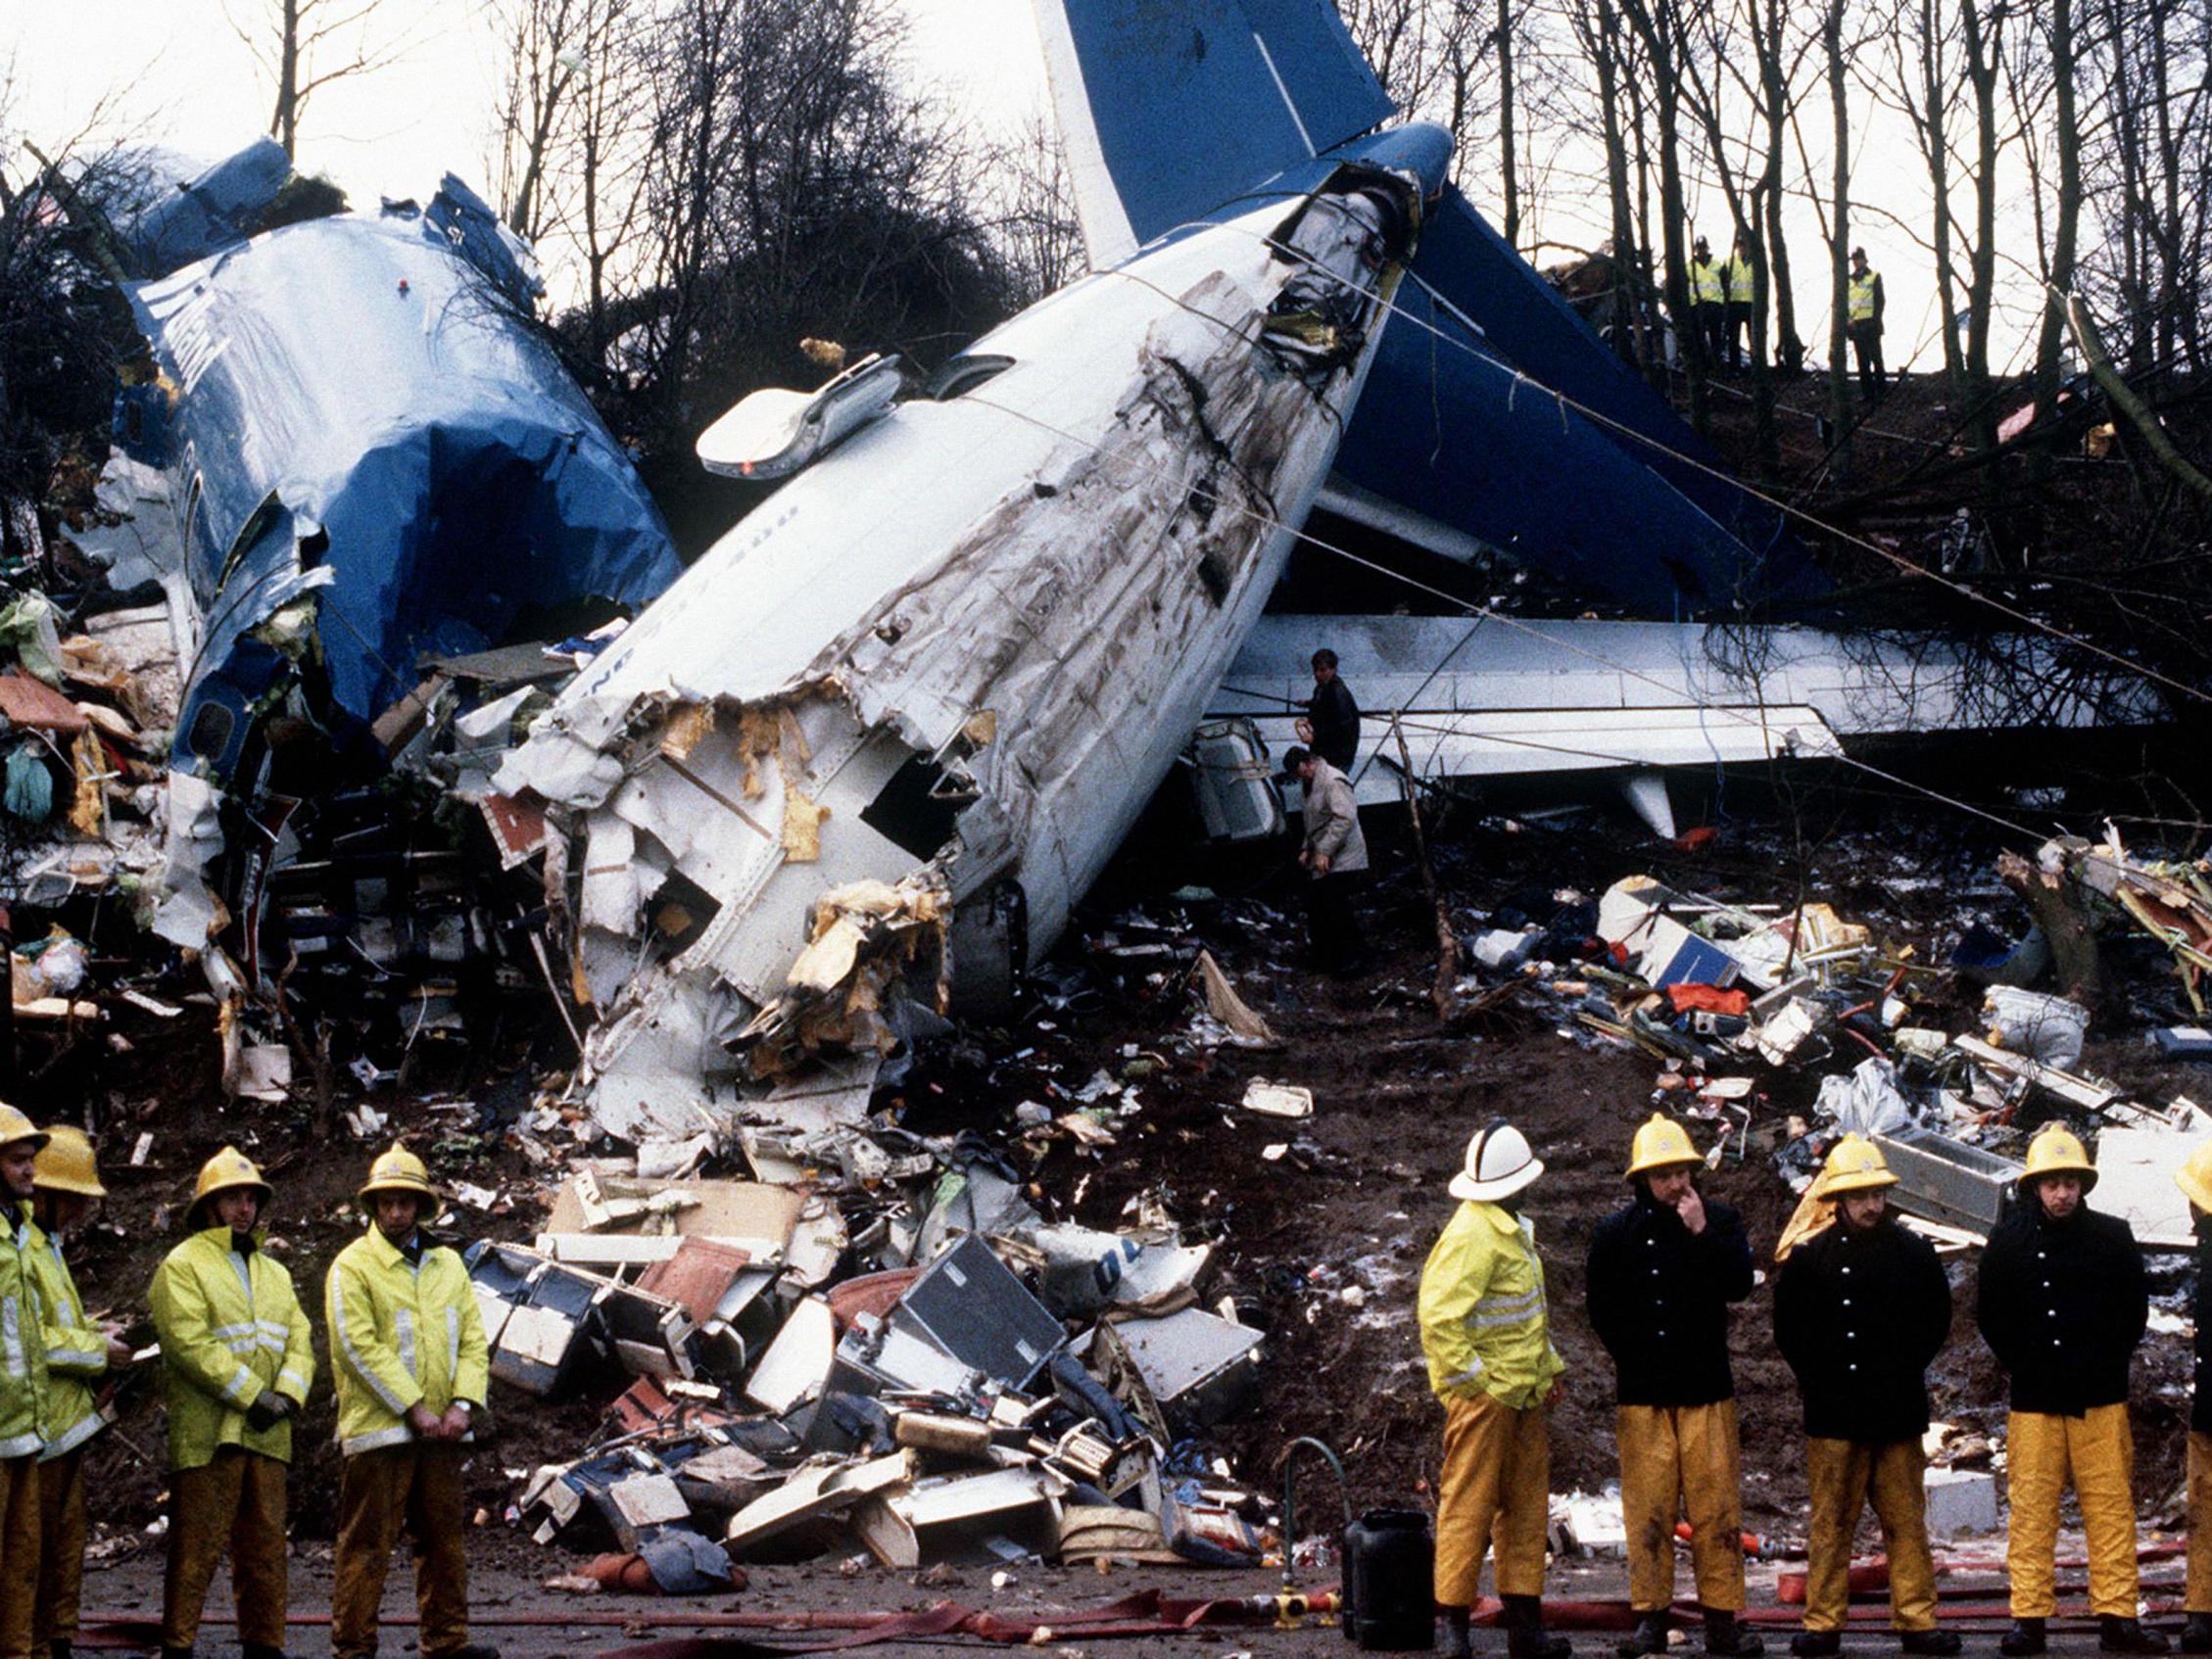 The Belfast-bound British Midland Boeing 737, which crashed on an embankment of the M1 at Kegworth on the approach to East Midlands Airport after suffering engine trouble on the night of 8 January 8 1989